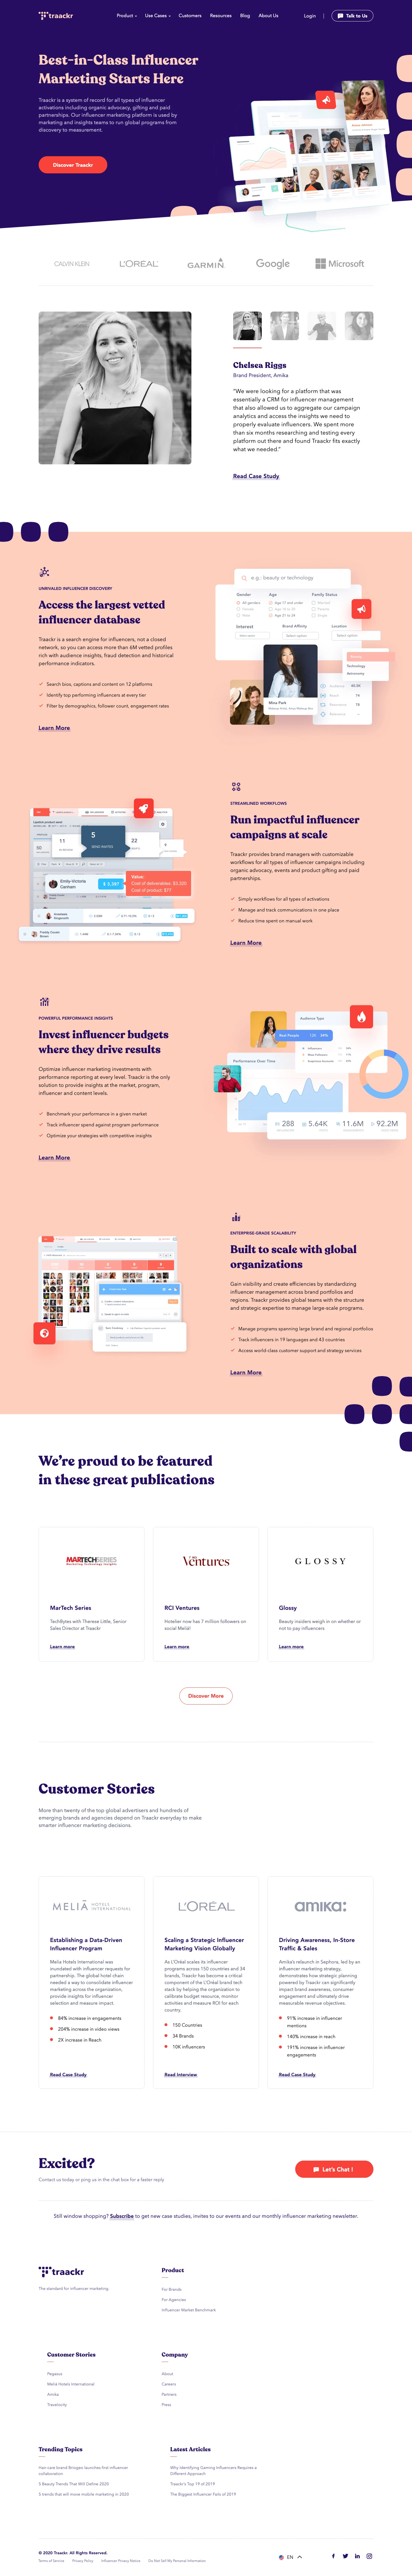 Traackr Landing Page Example: Traackr provides an influencer marketing platform for brands and agencies, including influencer discovery, influencer vetting, campaign management and analytics for organic and paid influencer strategies.